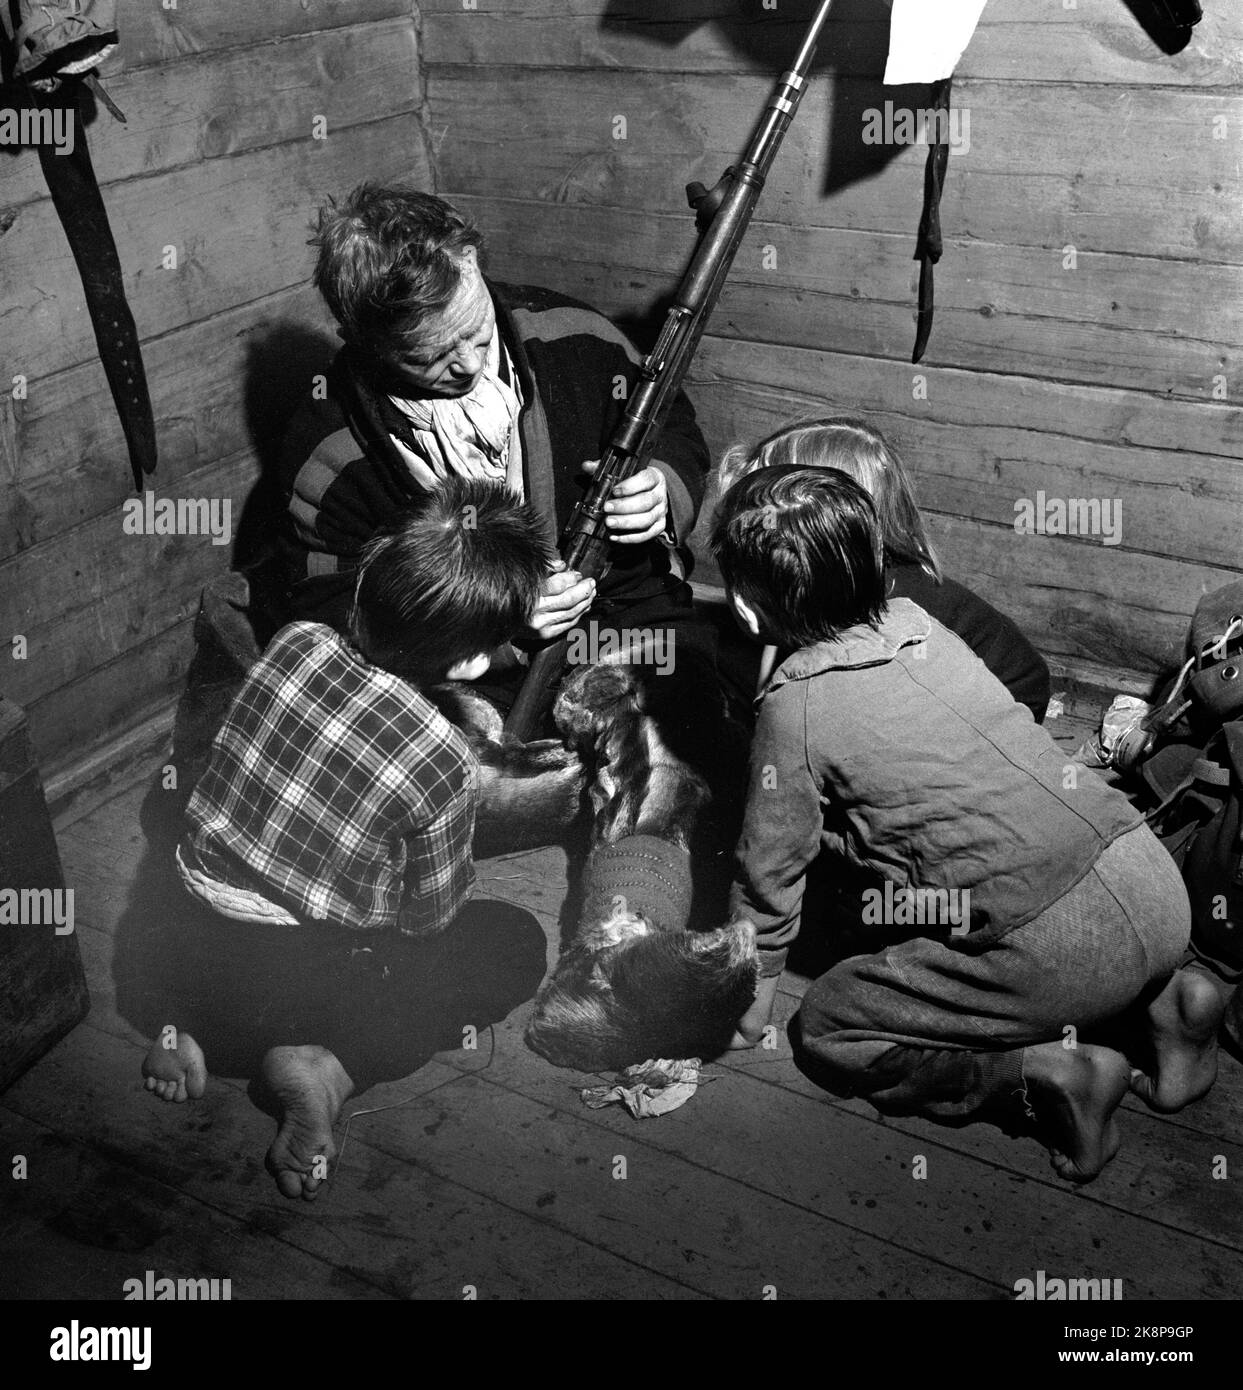 Finnmark in the winter of 1949. Extensive wolf hunting on Finnmarksvidda. The Ministry of Agriculture allocated money to hunt wolves in Finnmark after large flocks of reindeer had been damaged by wolves. The action used local and hired hunters as well as flights and belt cars. Young Same boys study the rifle of one of the hunters. Photo: Sverre A. Børretzen / Current / NTB Stock Photo